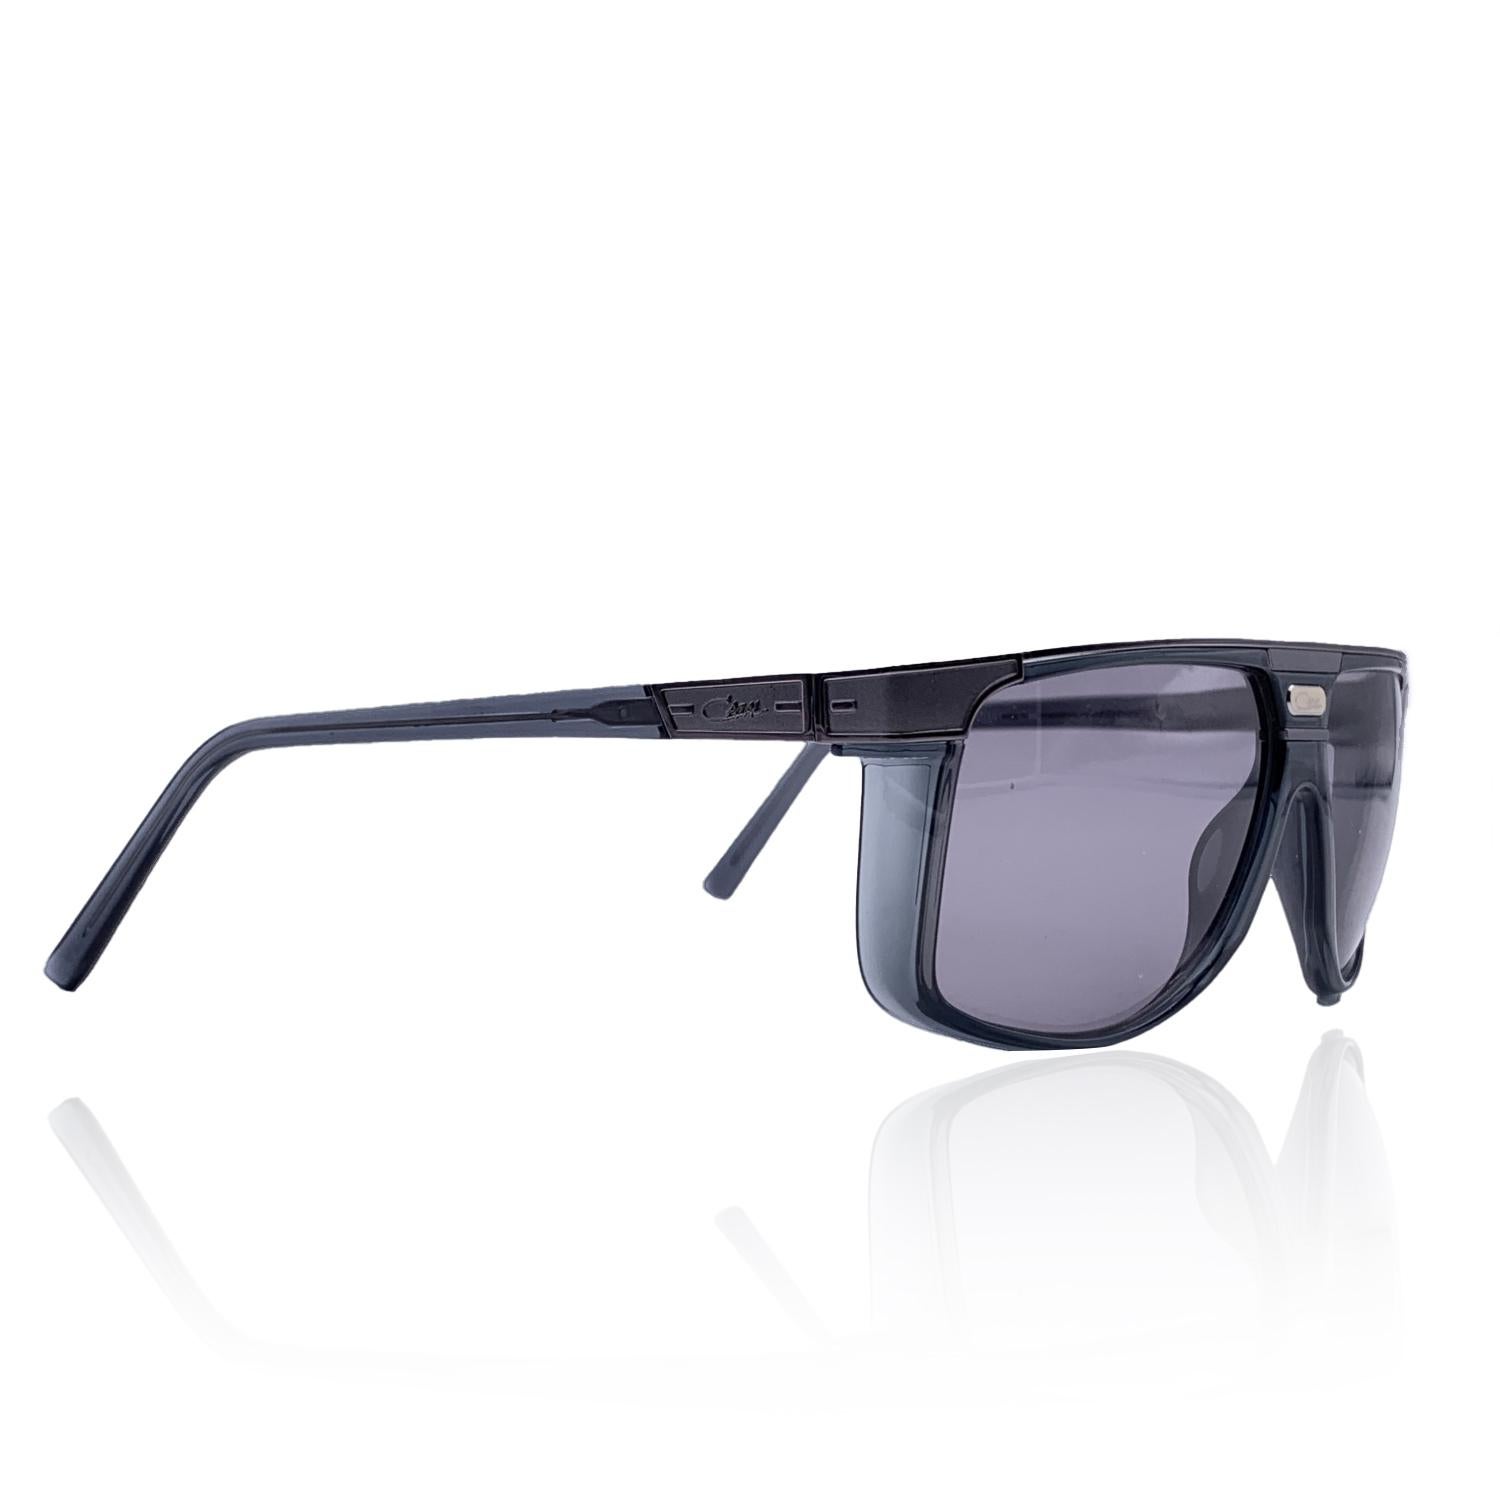 Cazal Grey Gunmetal Acetate Sunglasses Mod. 673 003 61/12 150 mm In Excellent Condition For Sale In Rome, Rome